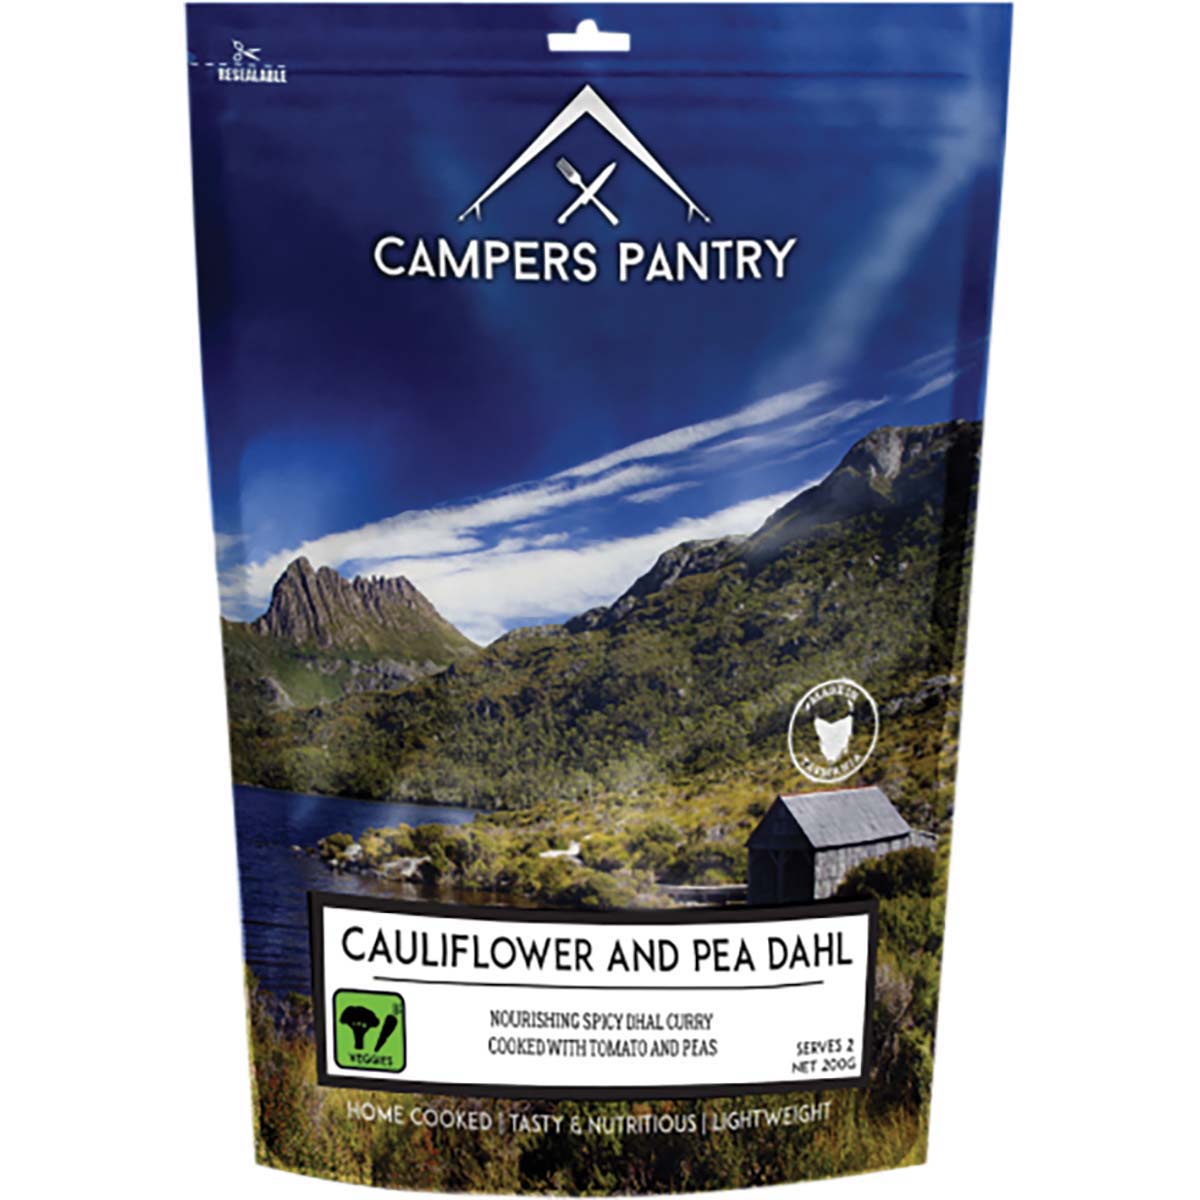 Campers Pantry Freeze Dried Cauliflower and Pea Dahl Double Serve